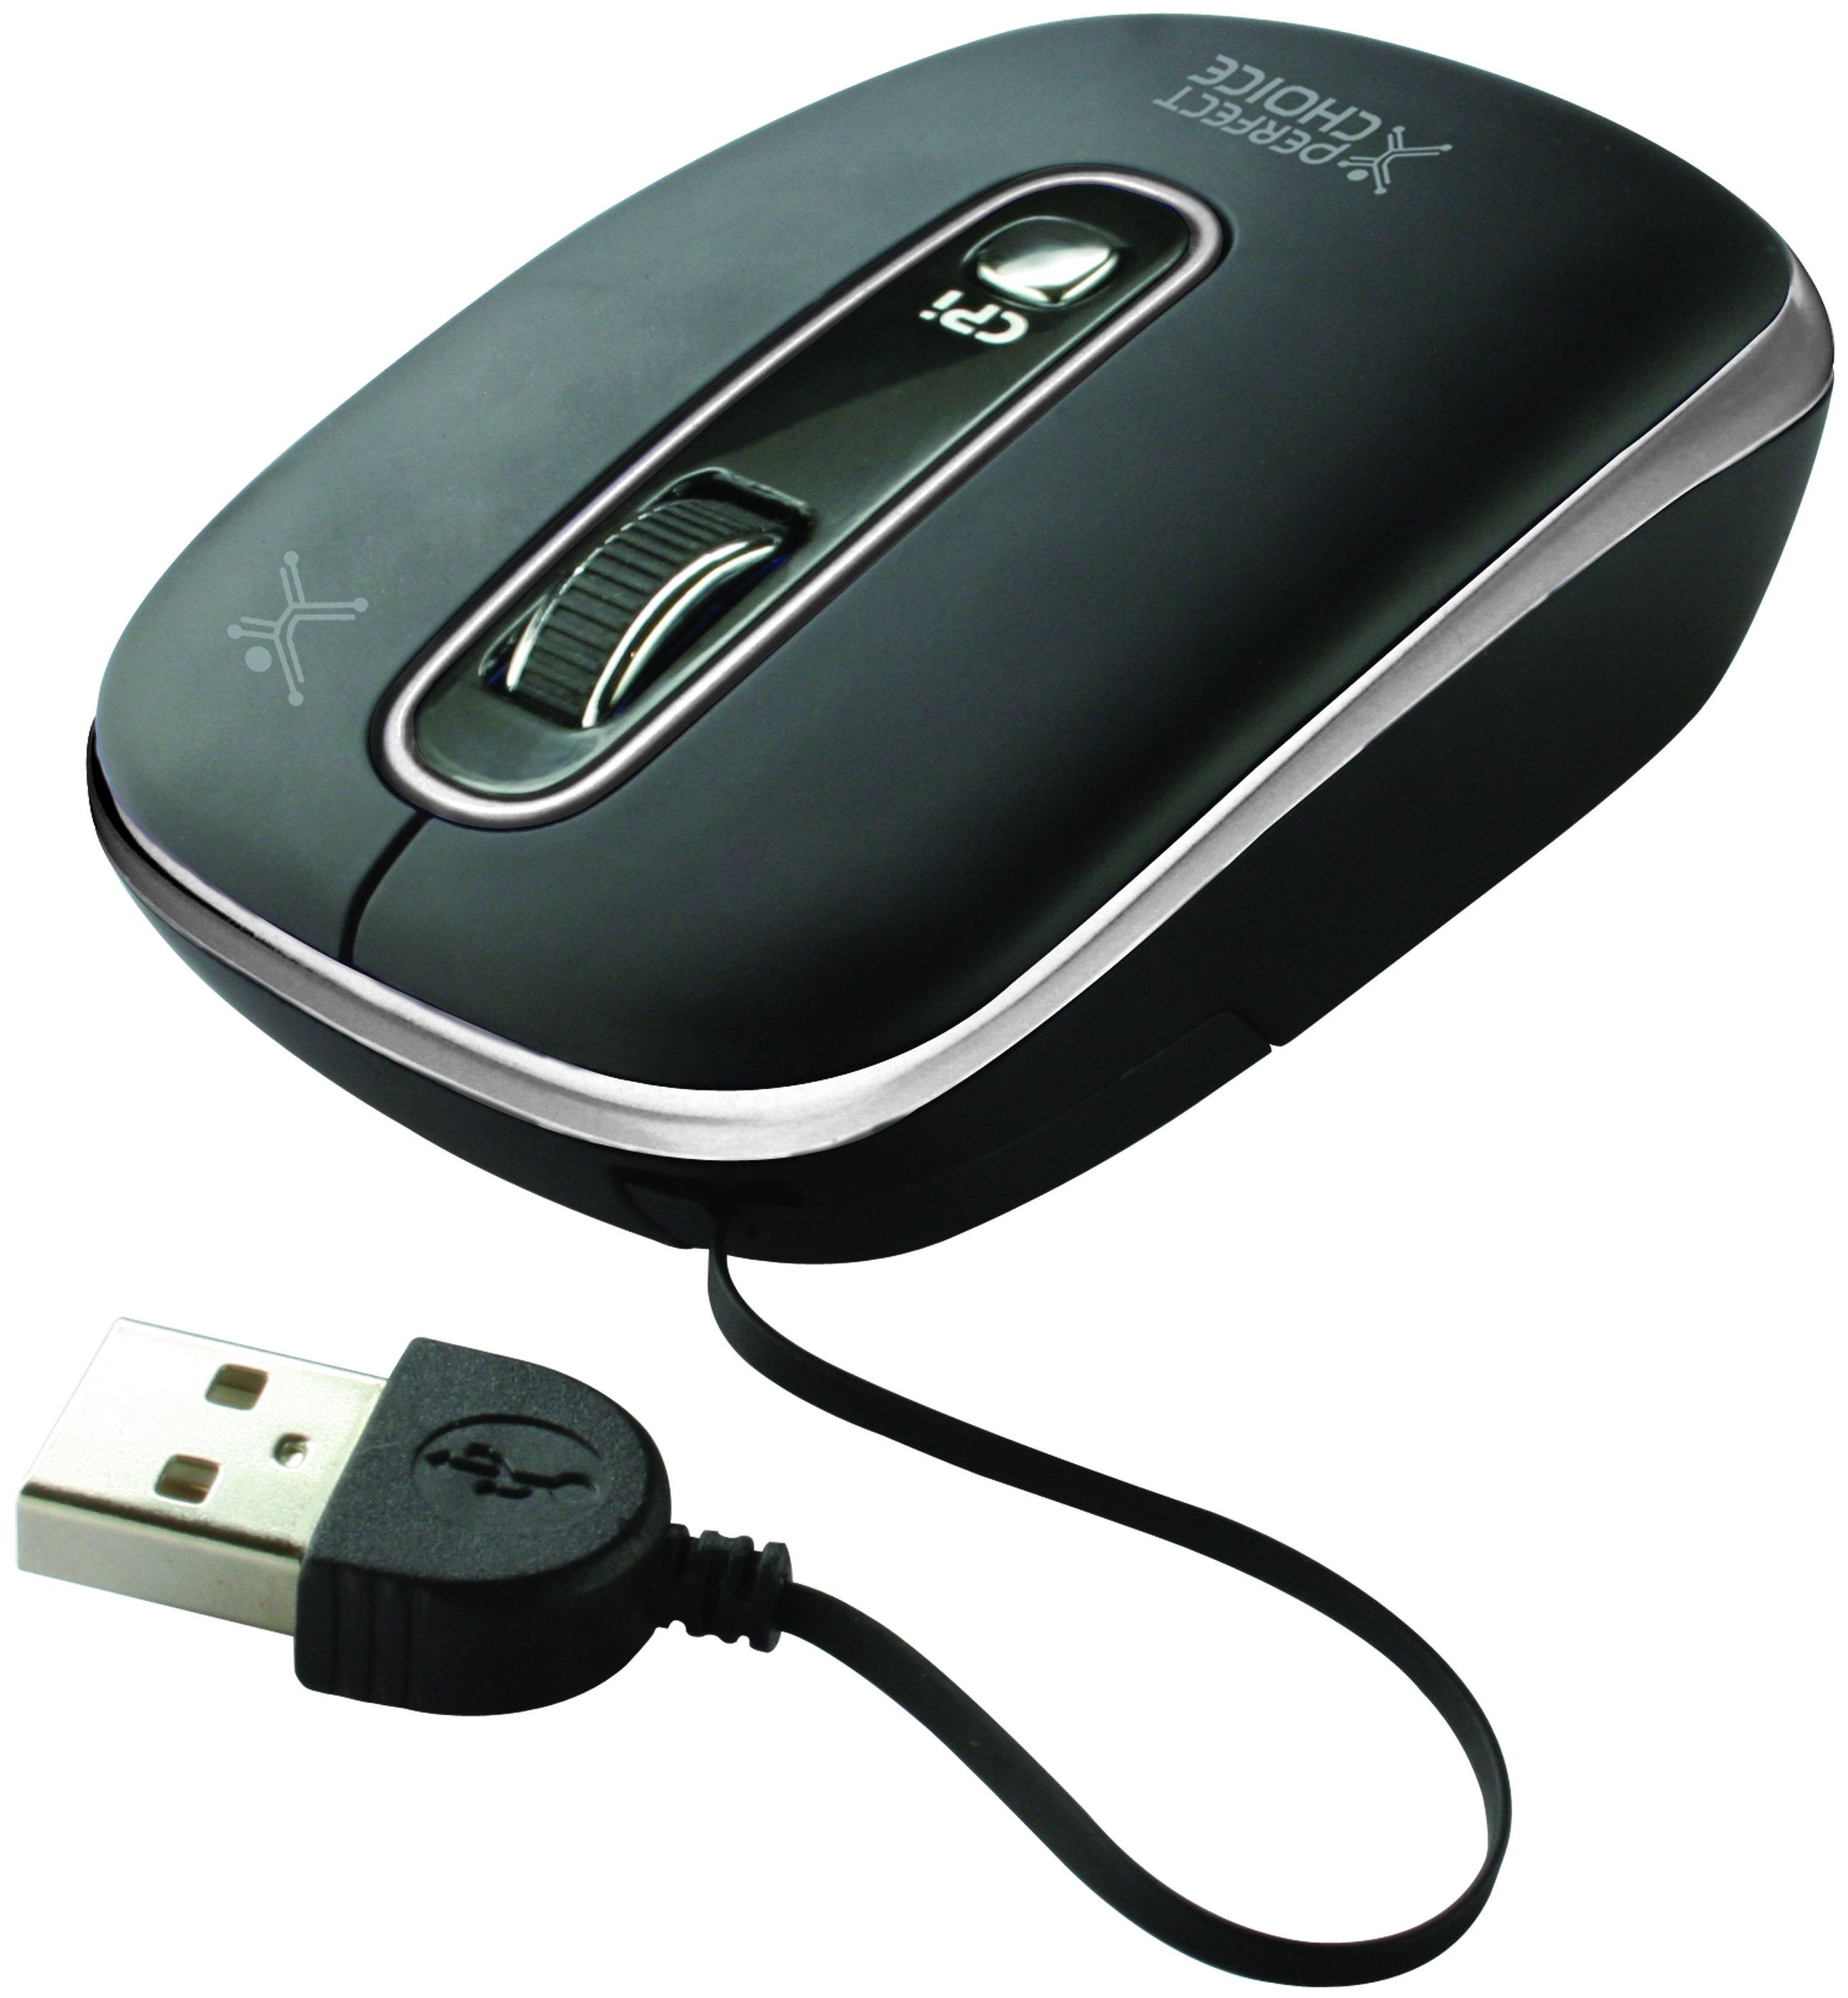 Mouse Perfect Choice Pc-043669-00001 Retractil Cable Oculto Usb